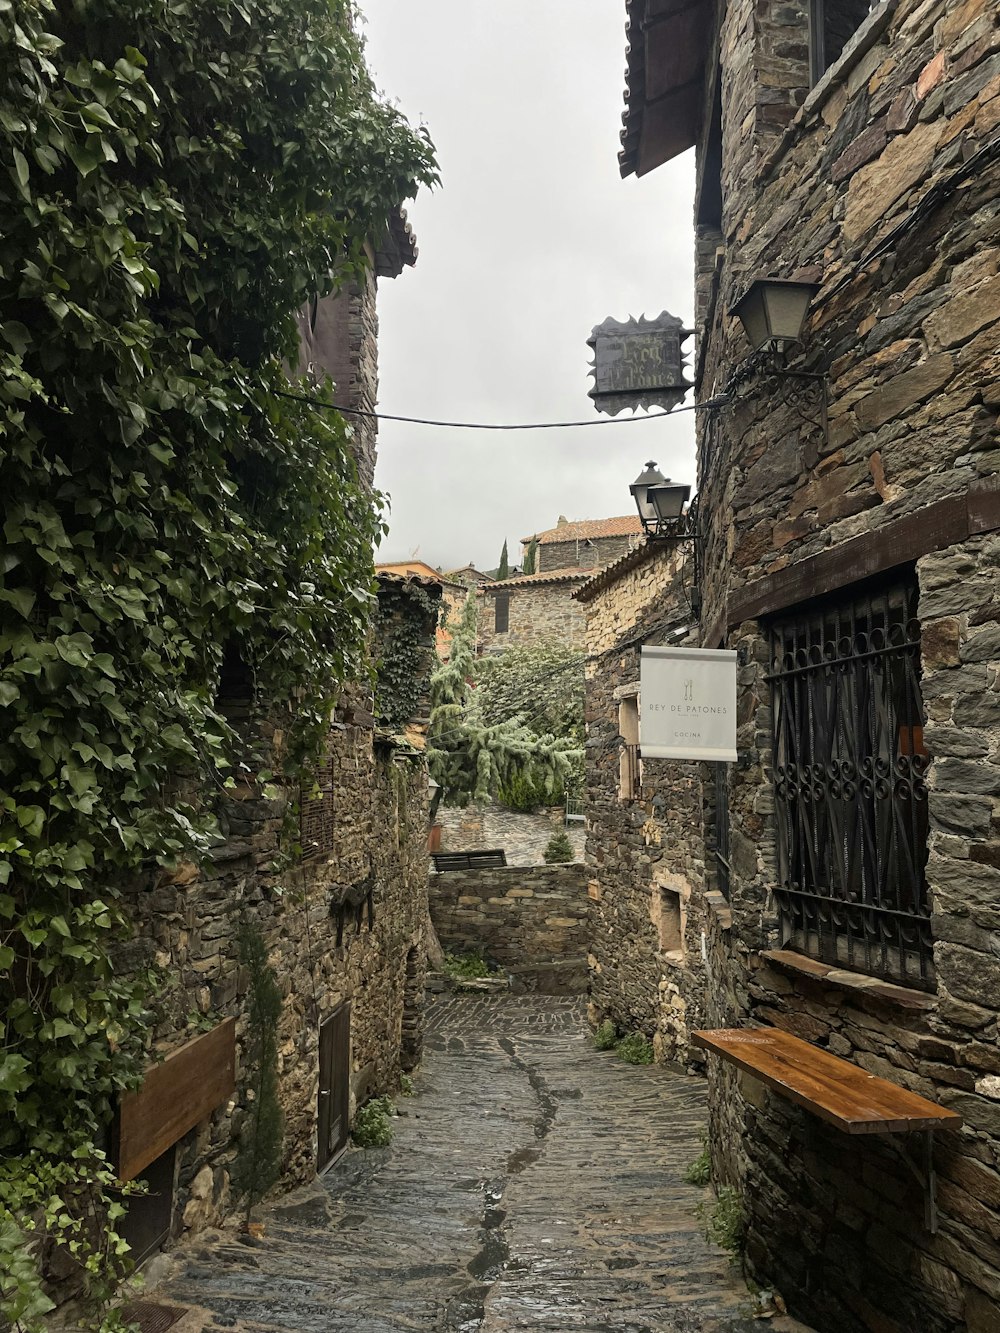 a cobblestone street with a bench in the middle of it